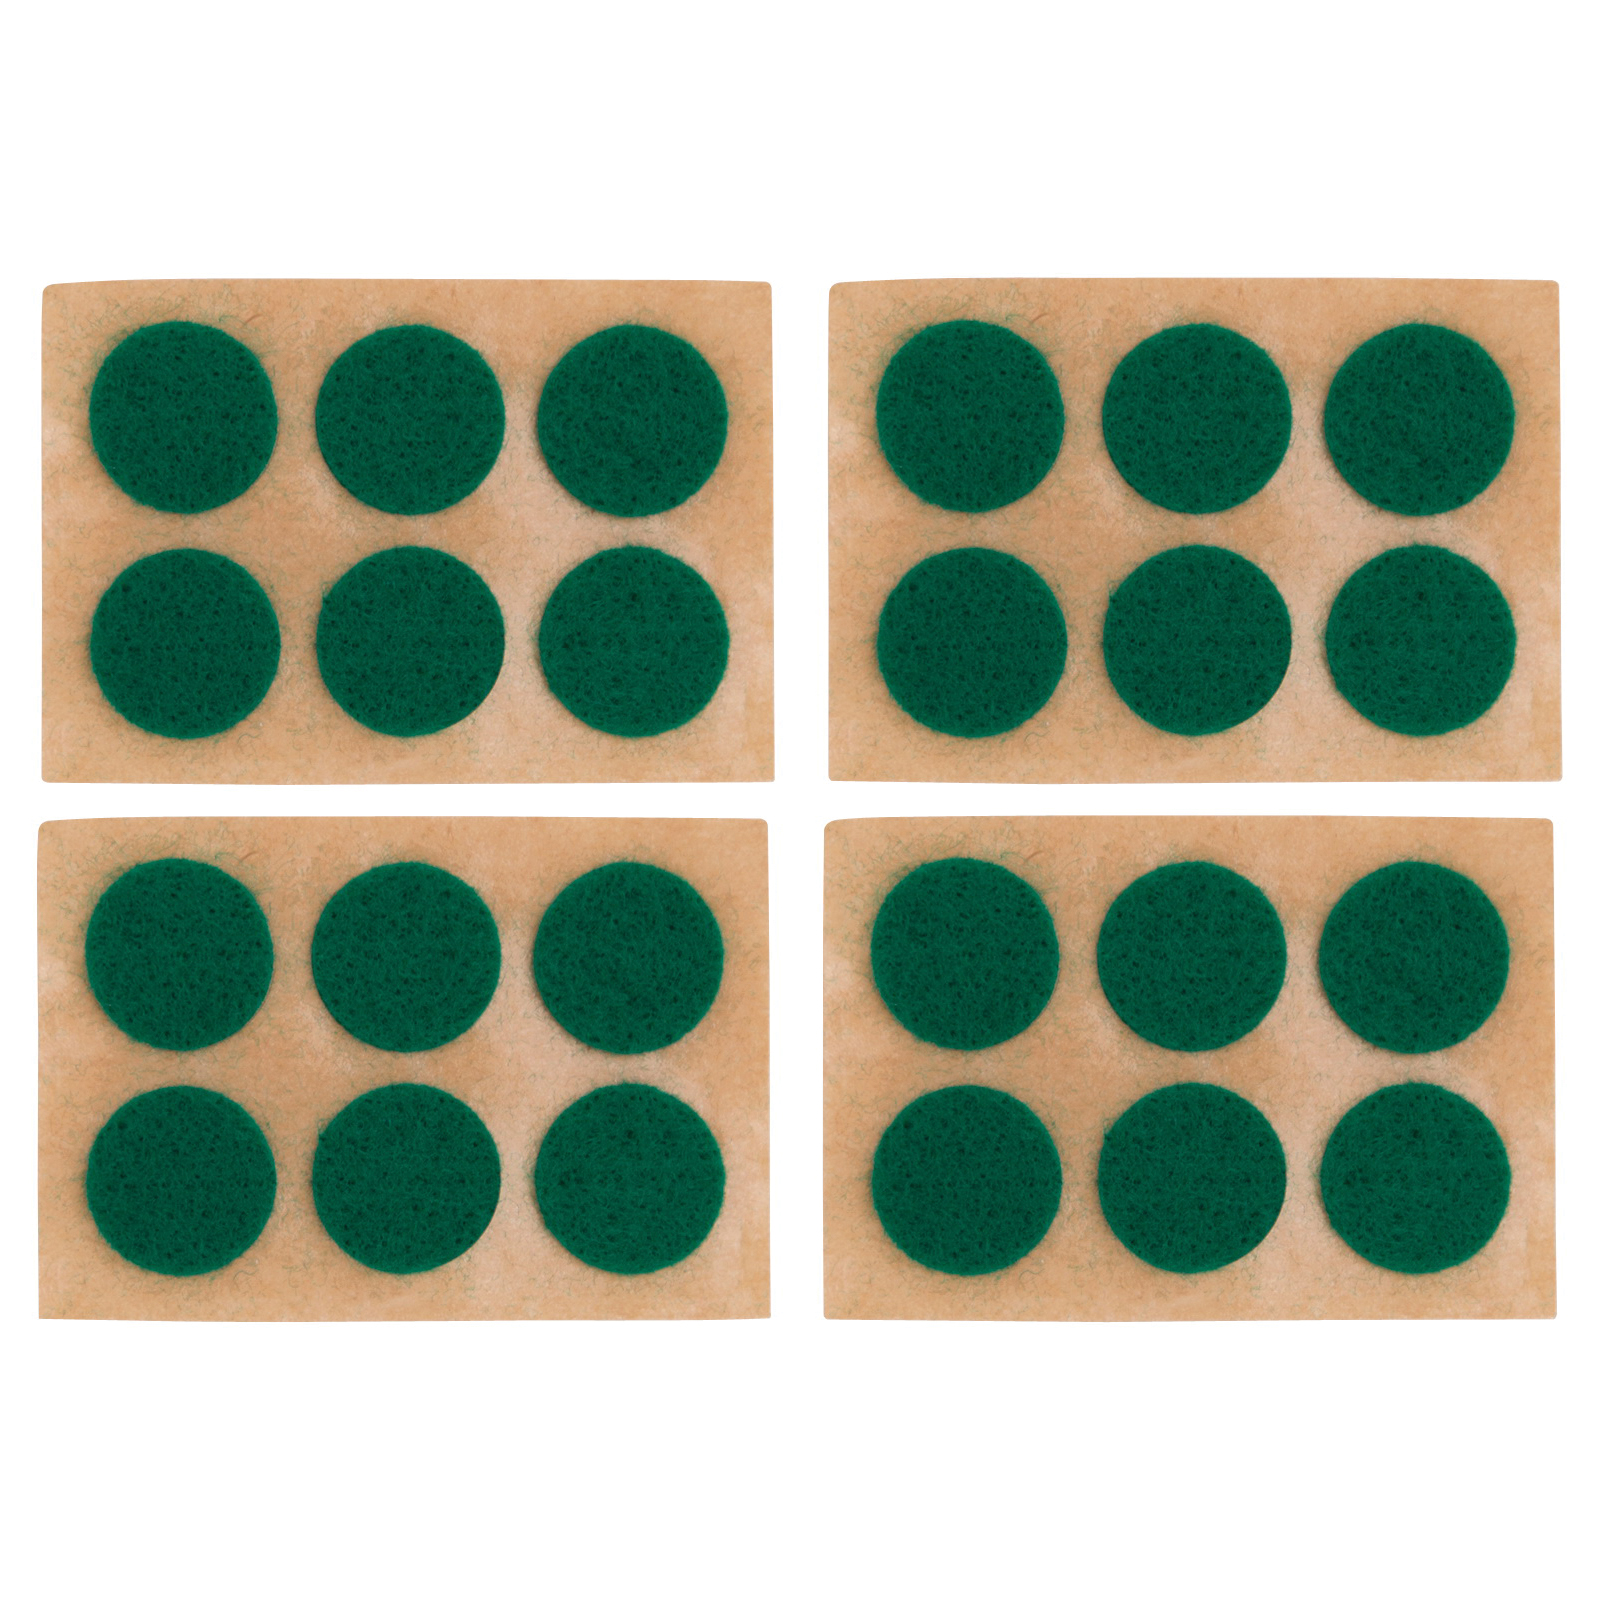 PH-122294-PS Furniture Pad, Felt Cloth, Green, 5/8 in Dia, 1/16 in Thick, Round